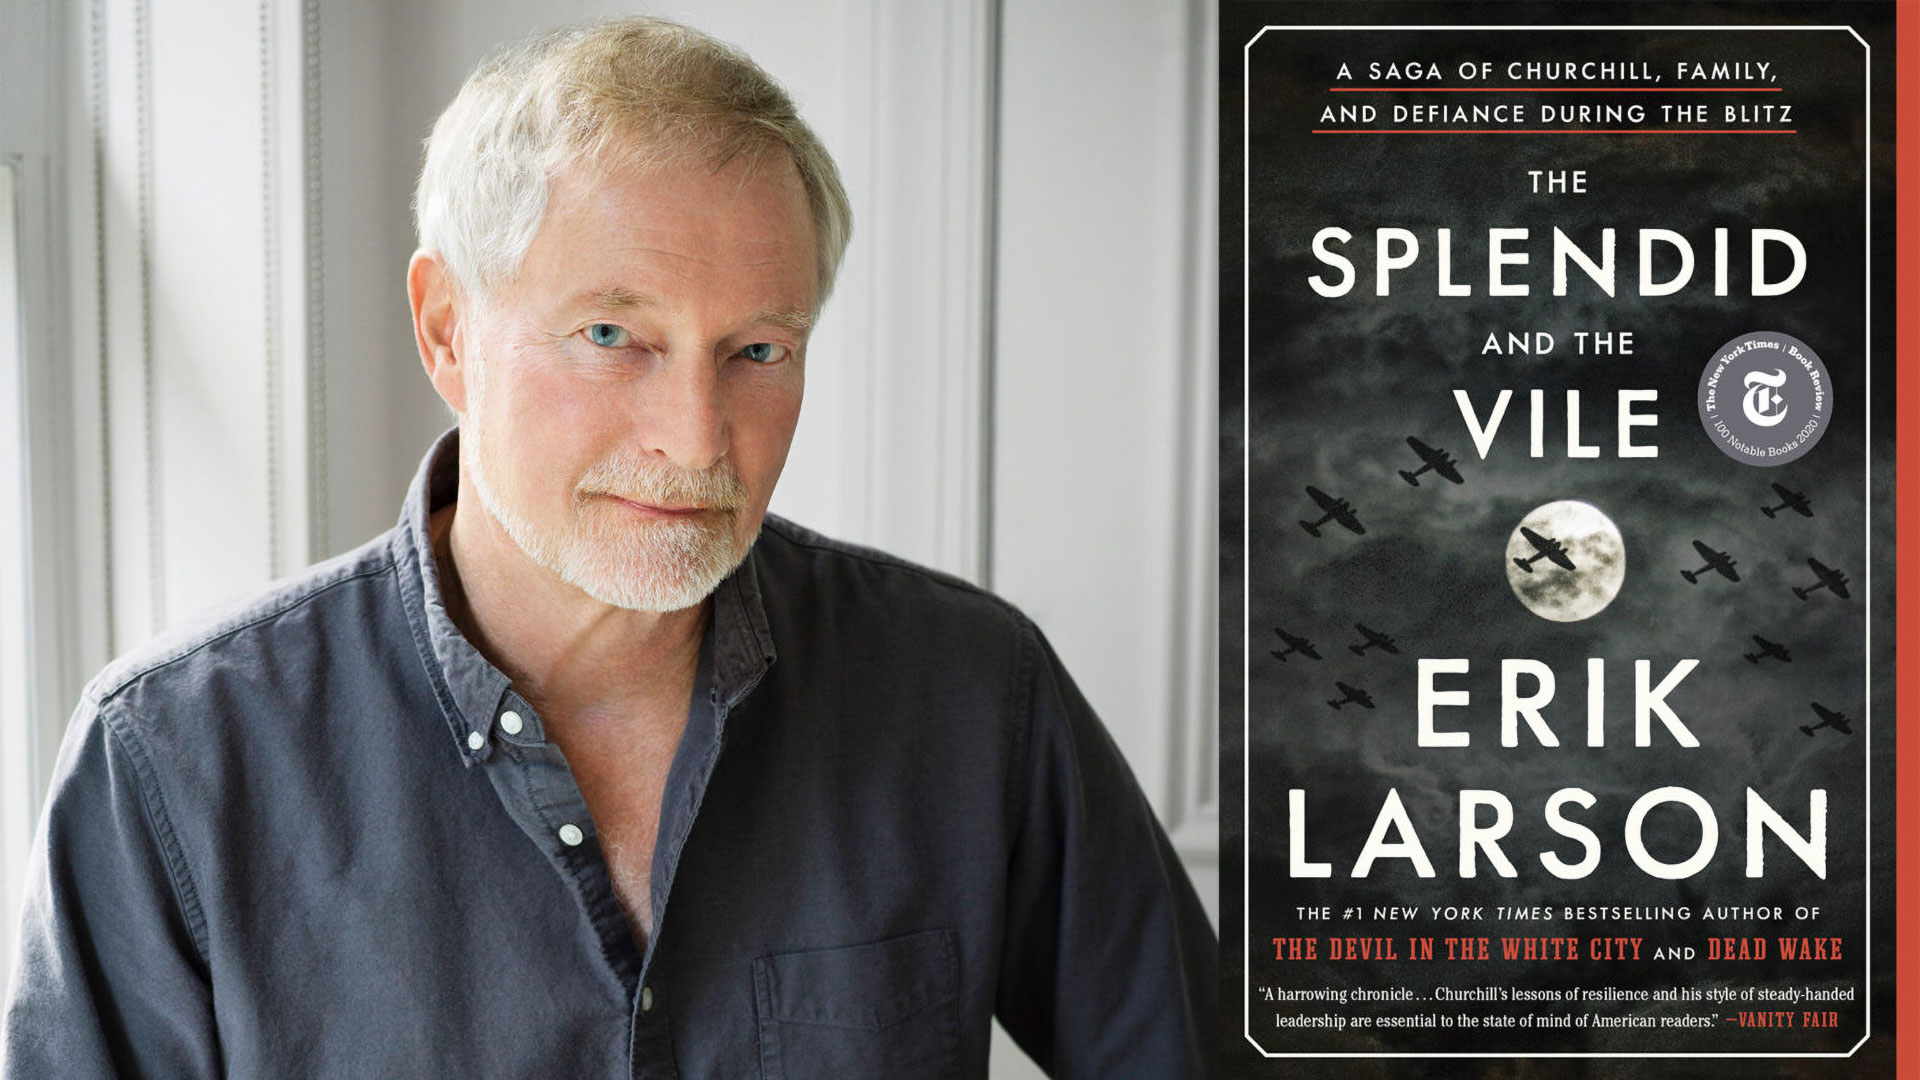 Author Erik Larson with a book cover of his latest work, "The Splendid and the Vile"